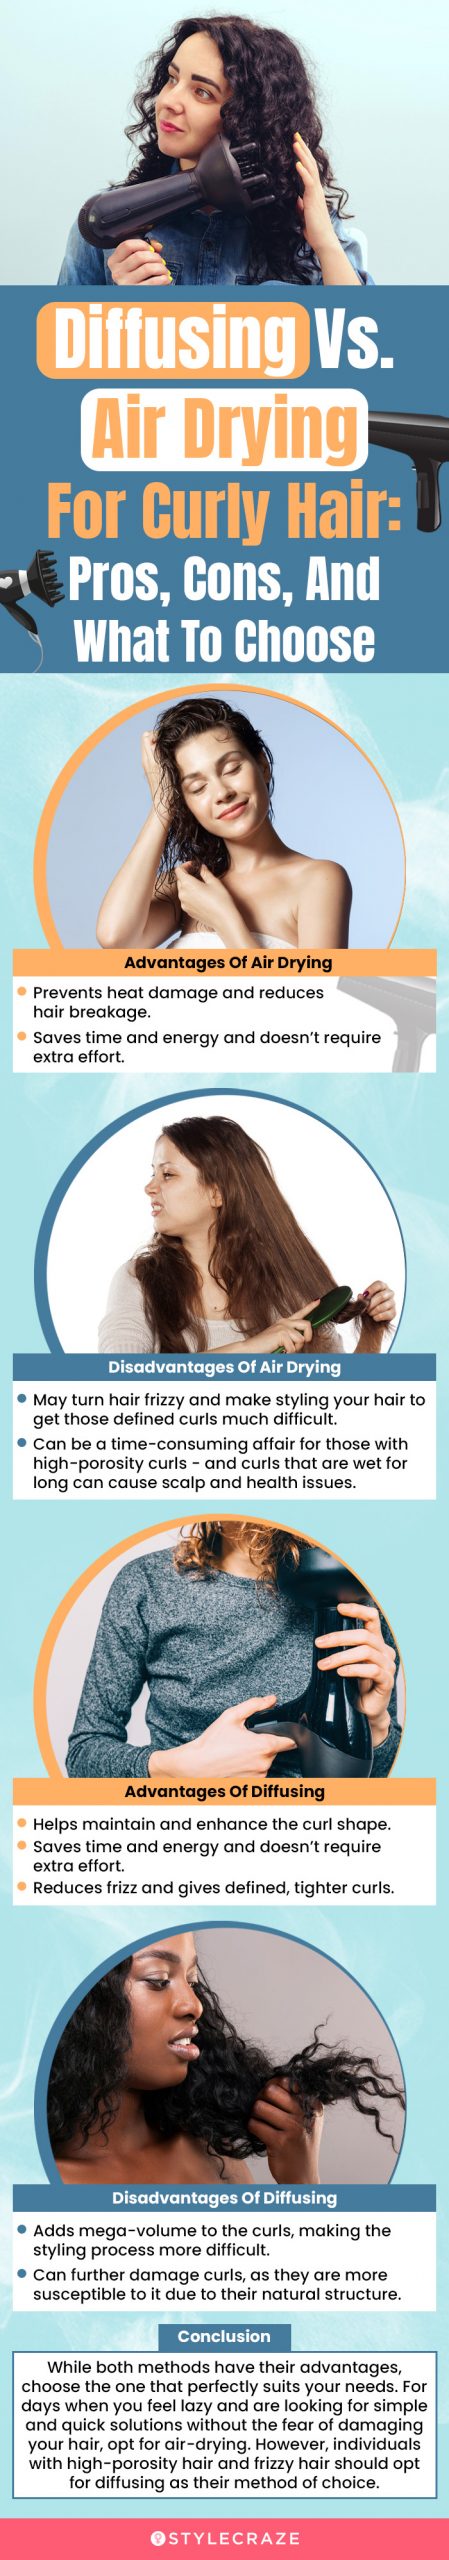 diffusing vs. air drying for curly hair pros, cons, and what to choose (infographic)